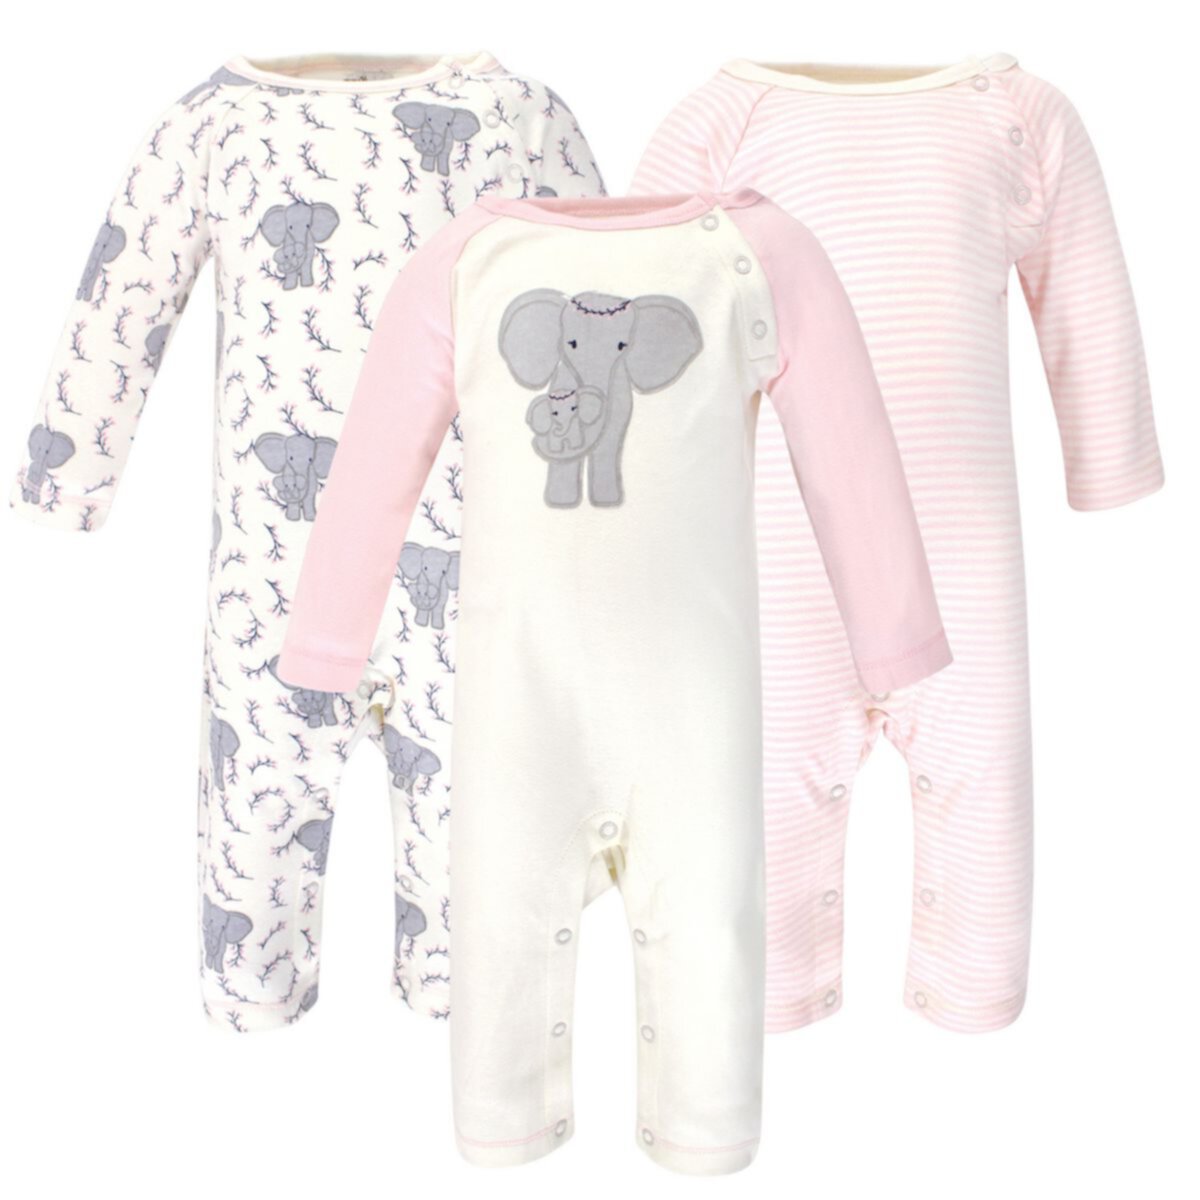 Touched by Nature Baby Girl Organic Cotton Coveralls 2pk, Girl Elephant Touched by Nature